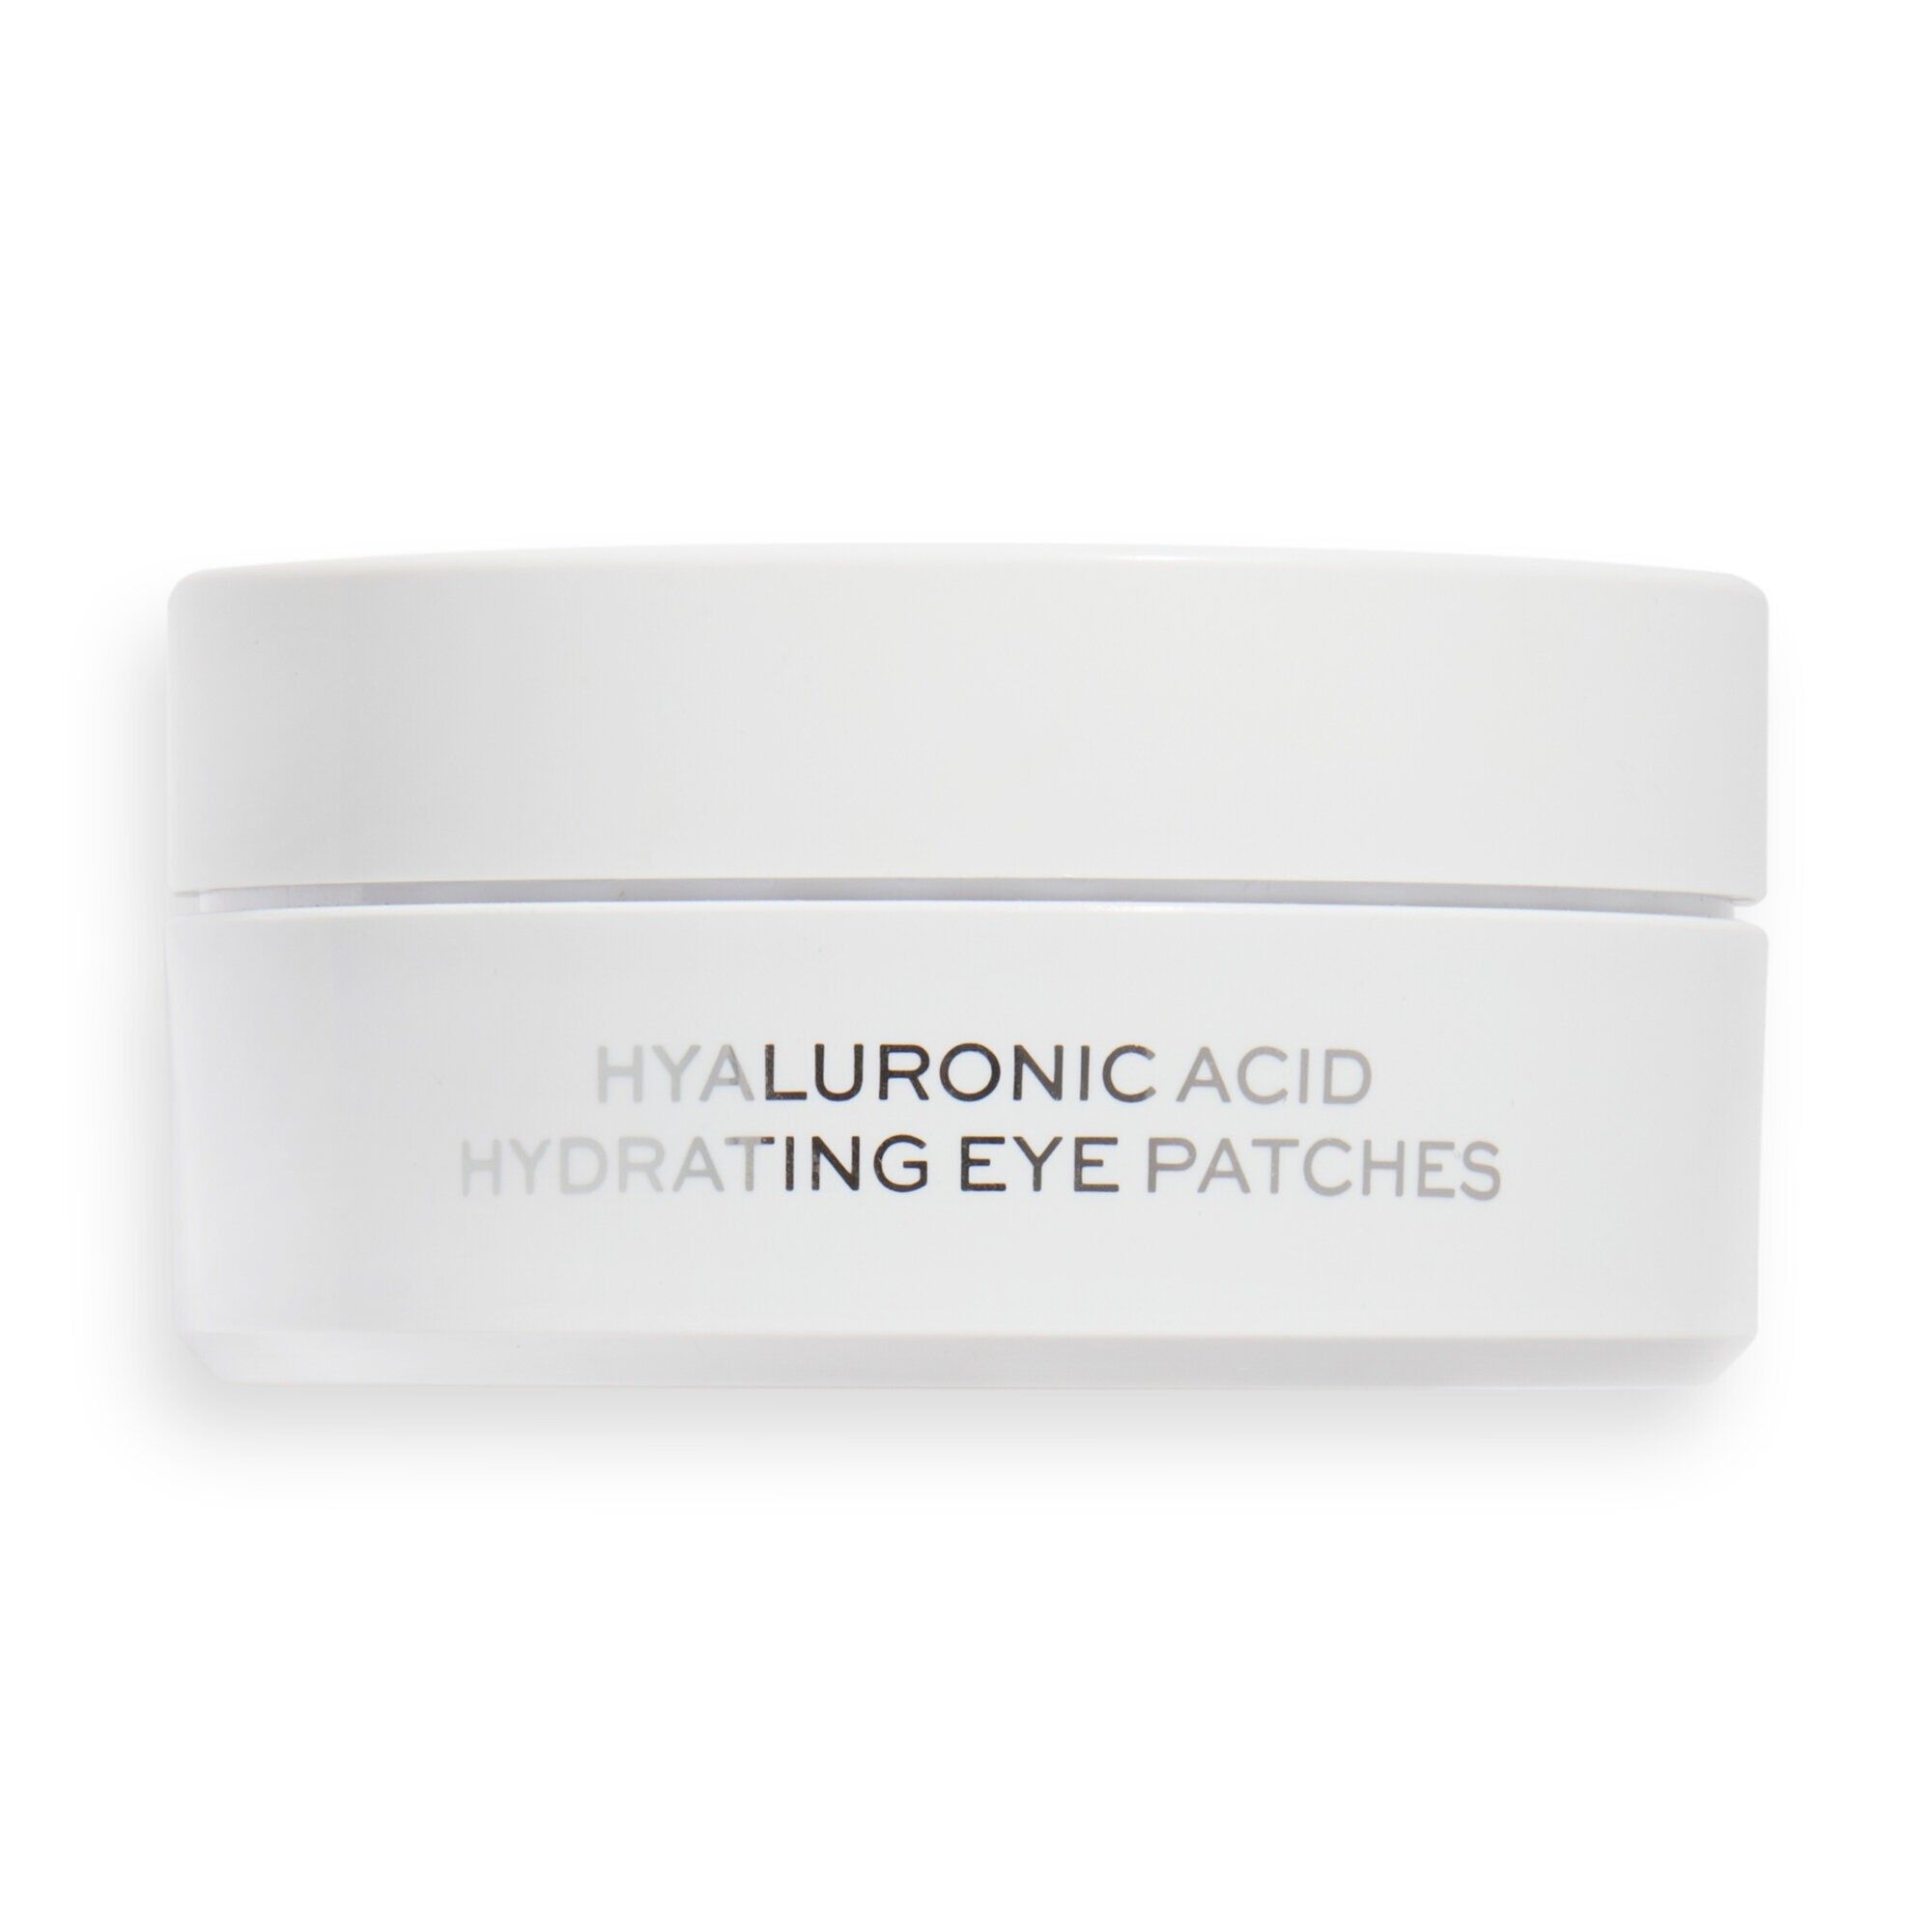 Hyaluronic Acid Hydrating Eye Patches (30 Pairsa)